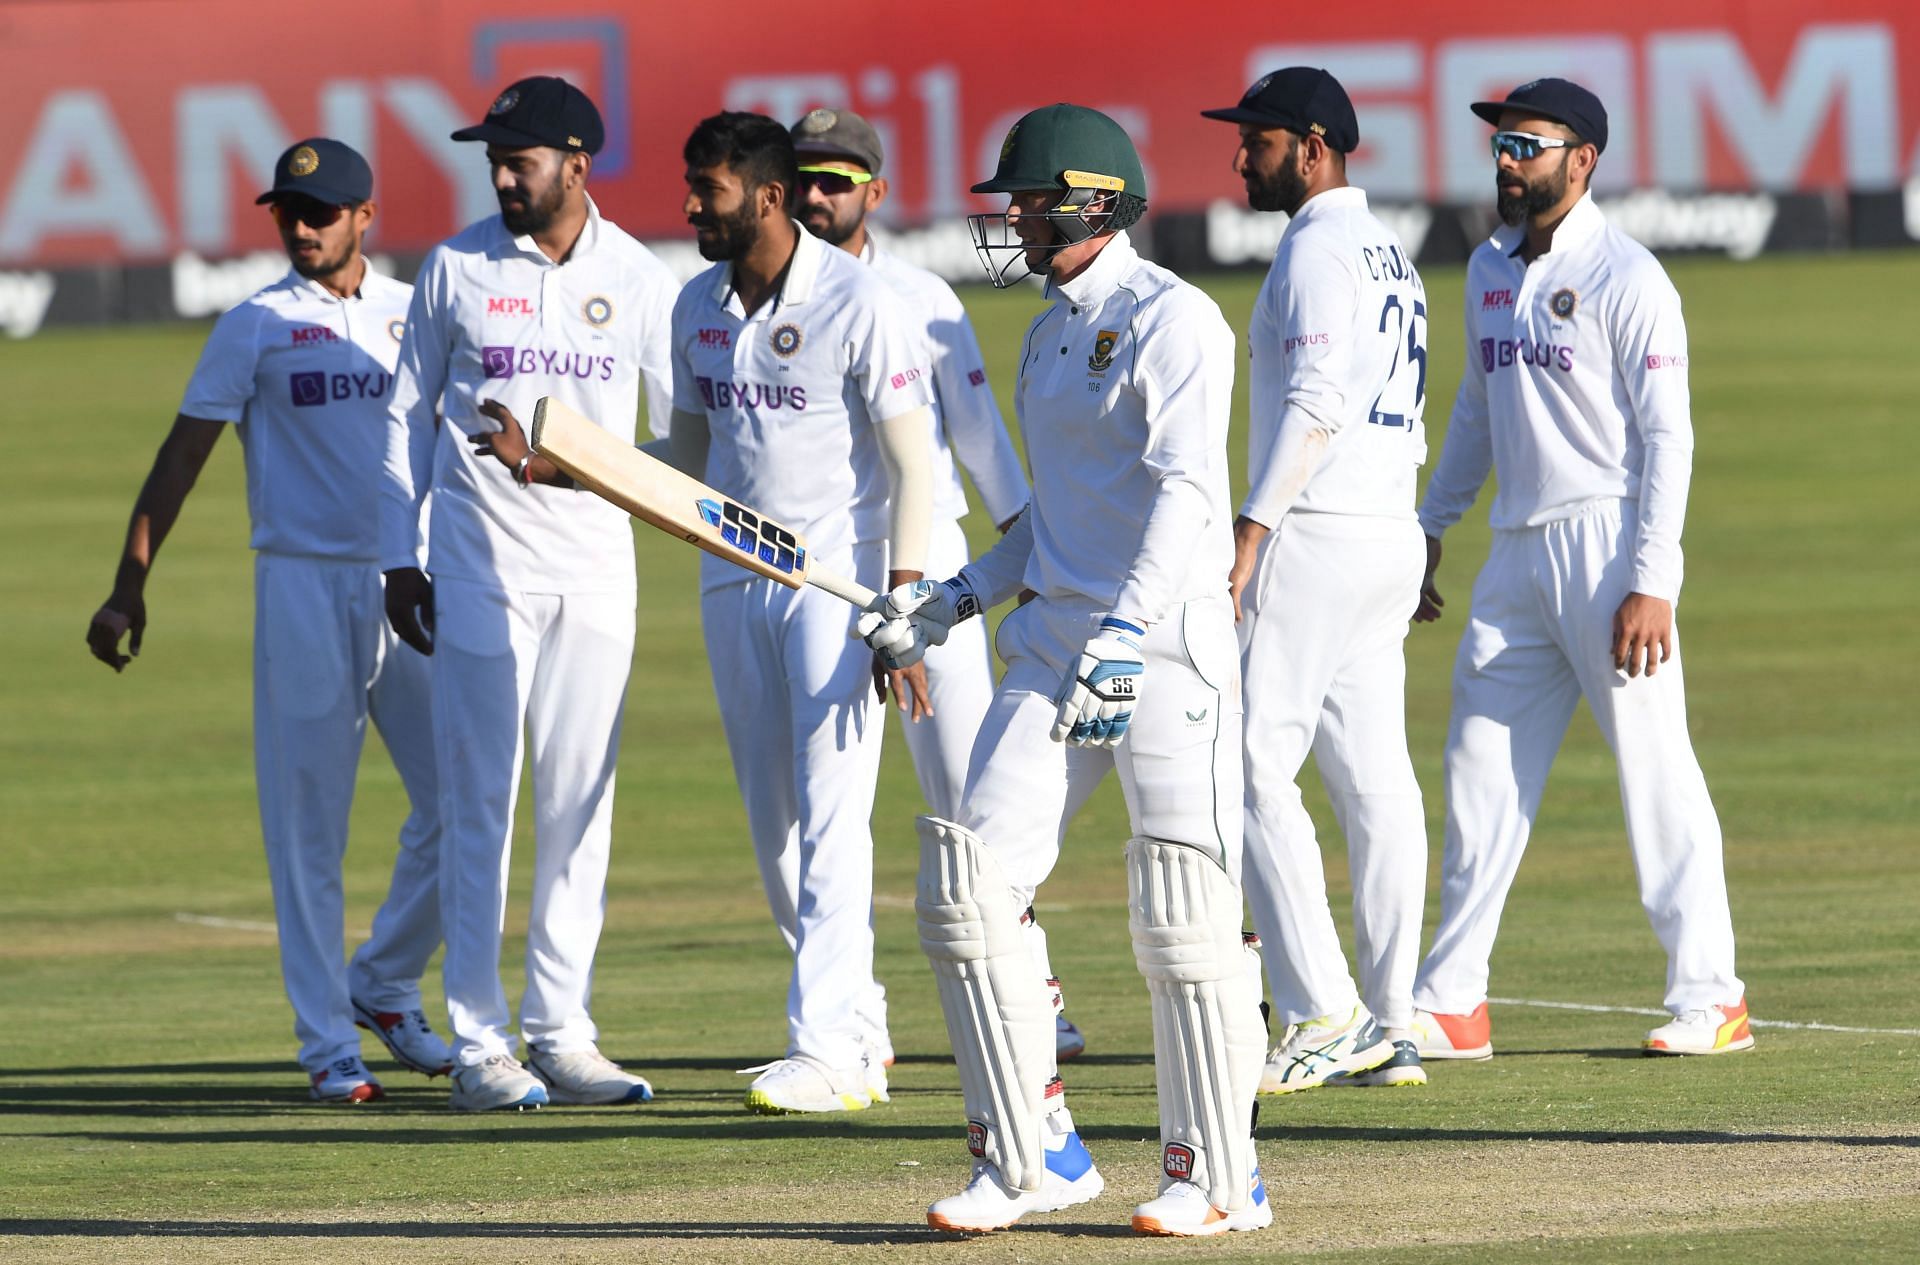 South Africa are 211 runs away from victory while India need 6 wickets